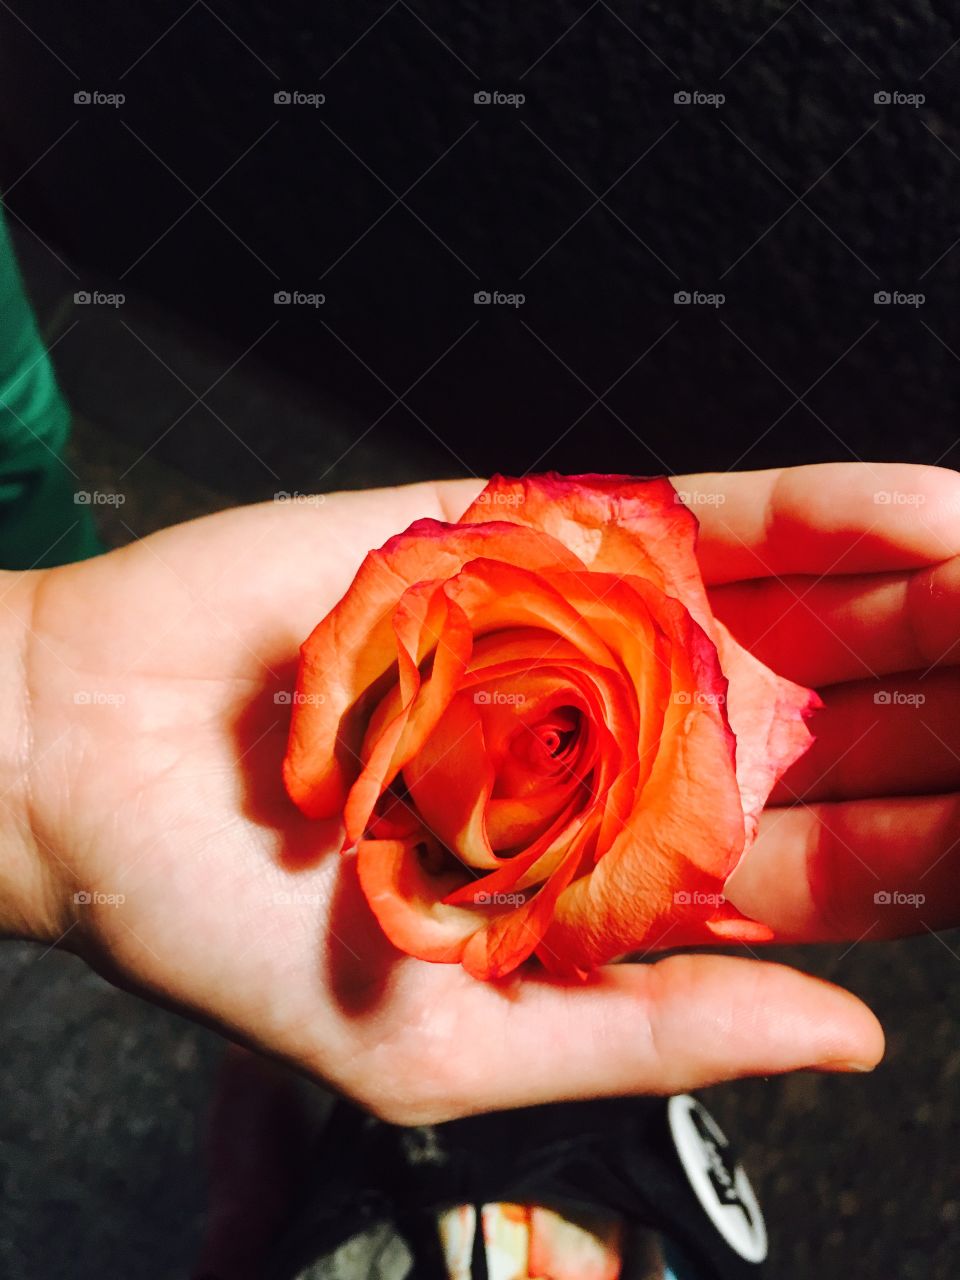 A rose in the hand 